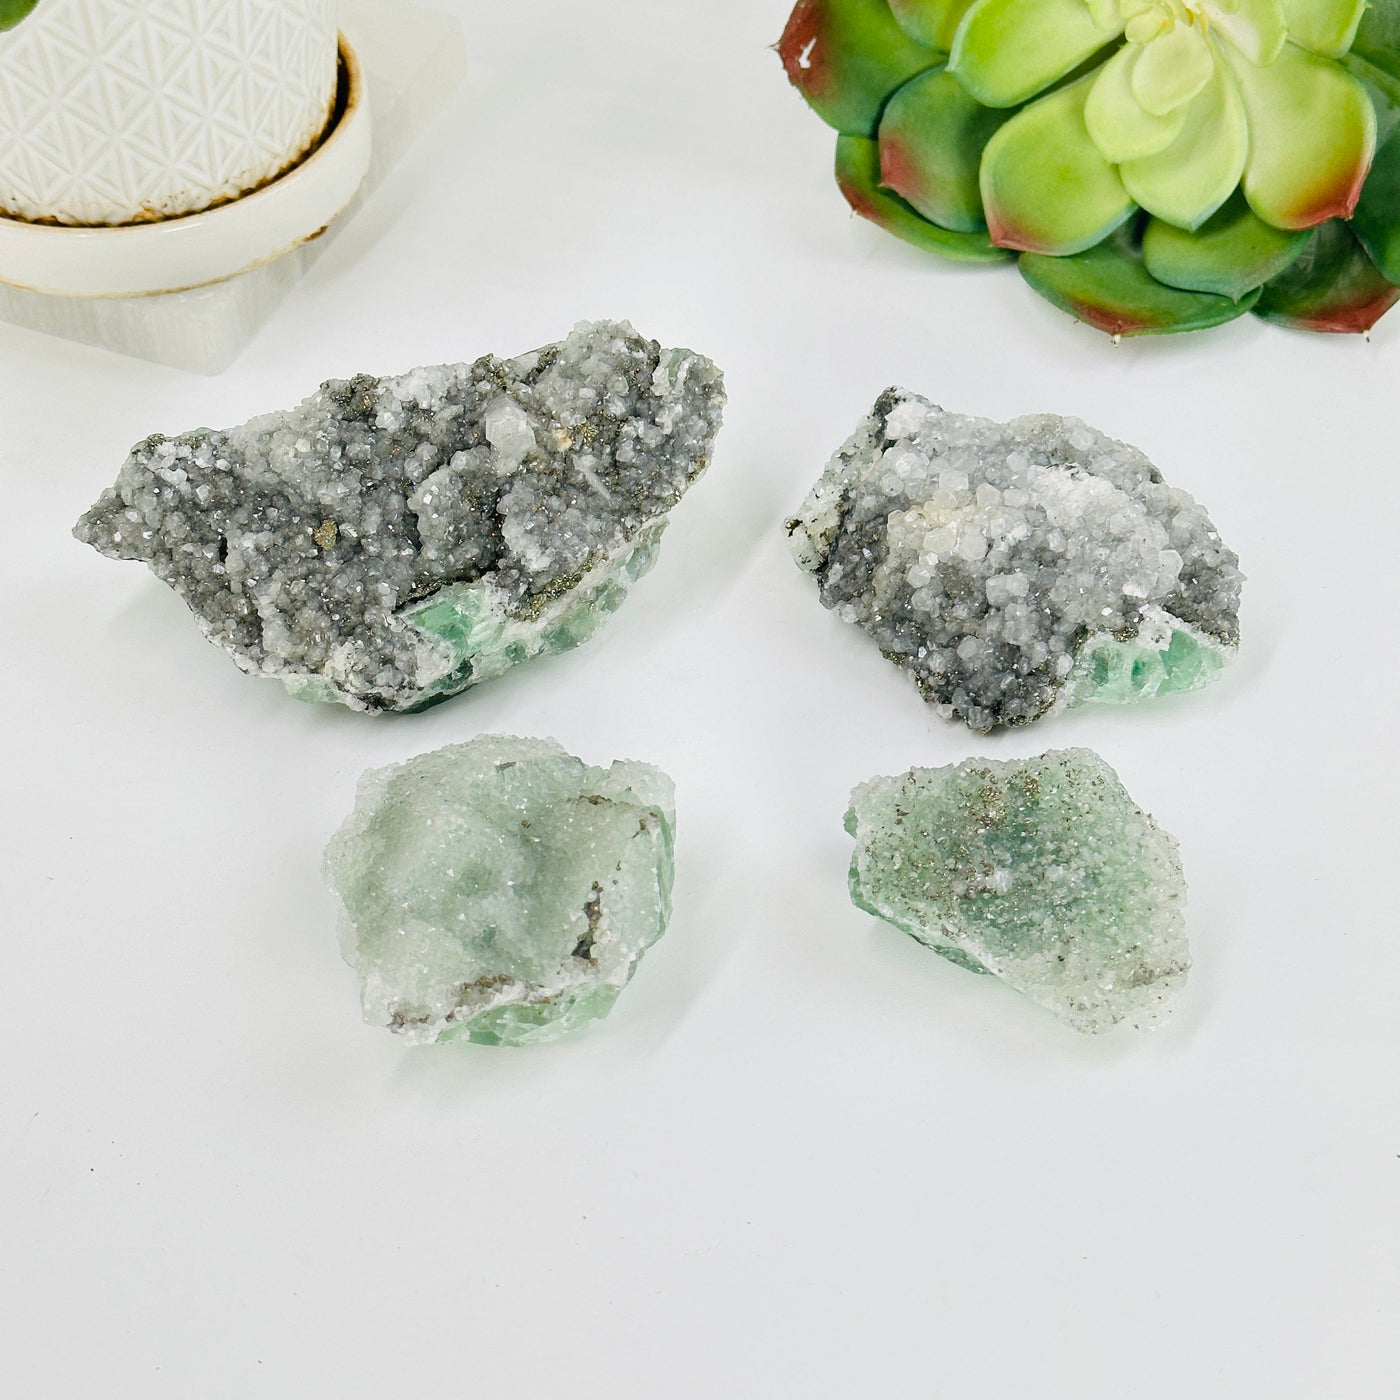 4 fluorite with pyrite and crystal quartz growth with decorations in the background